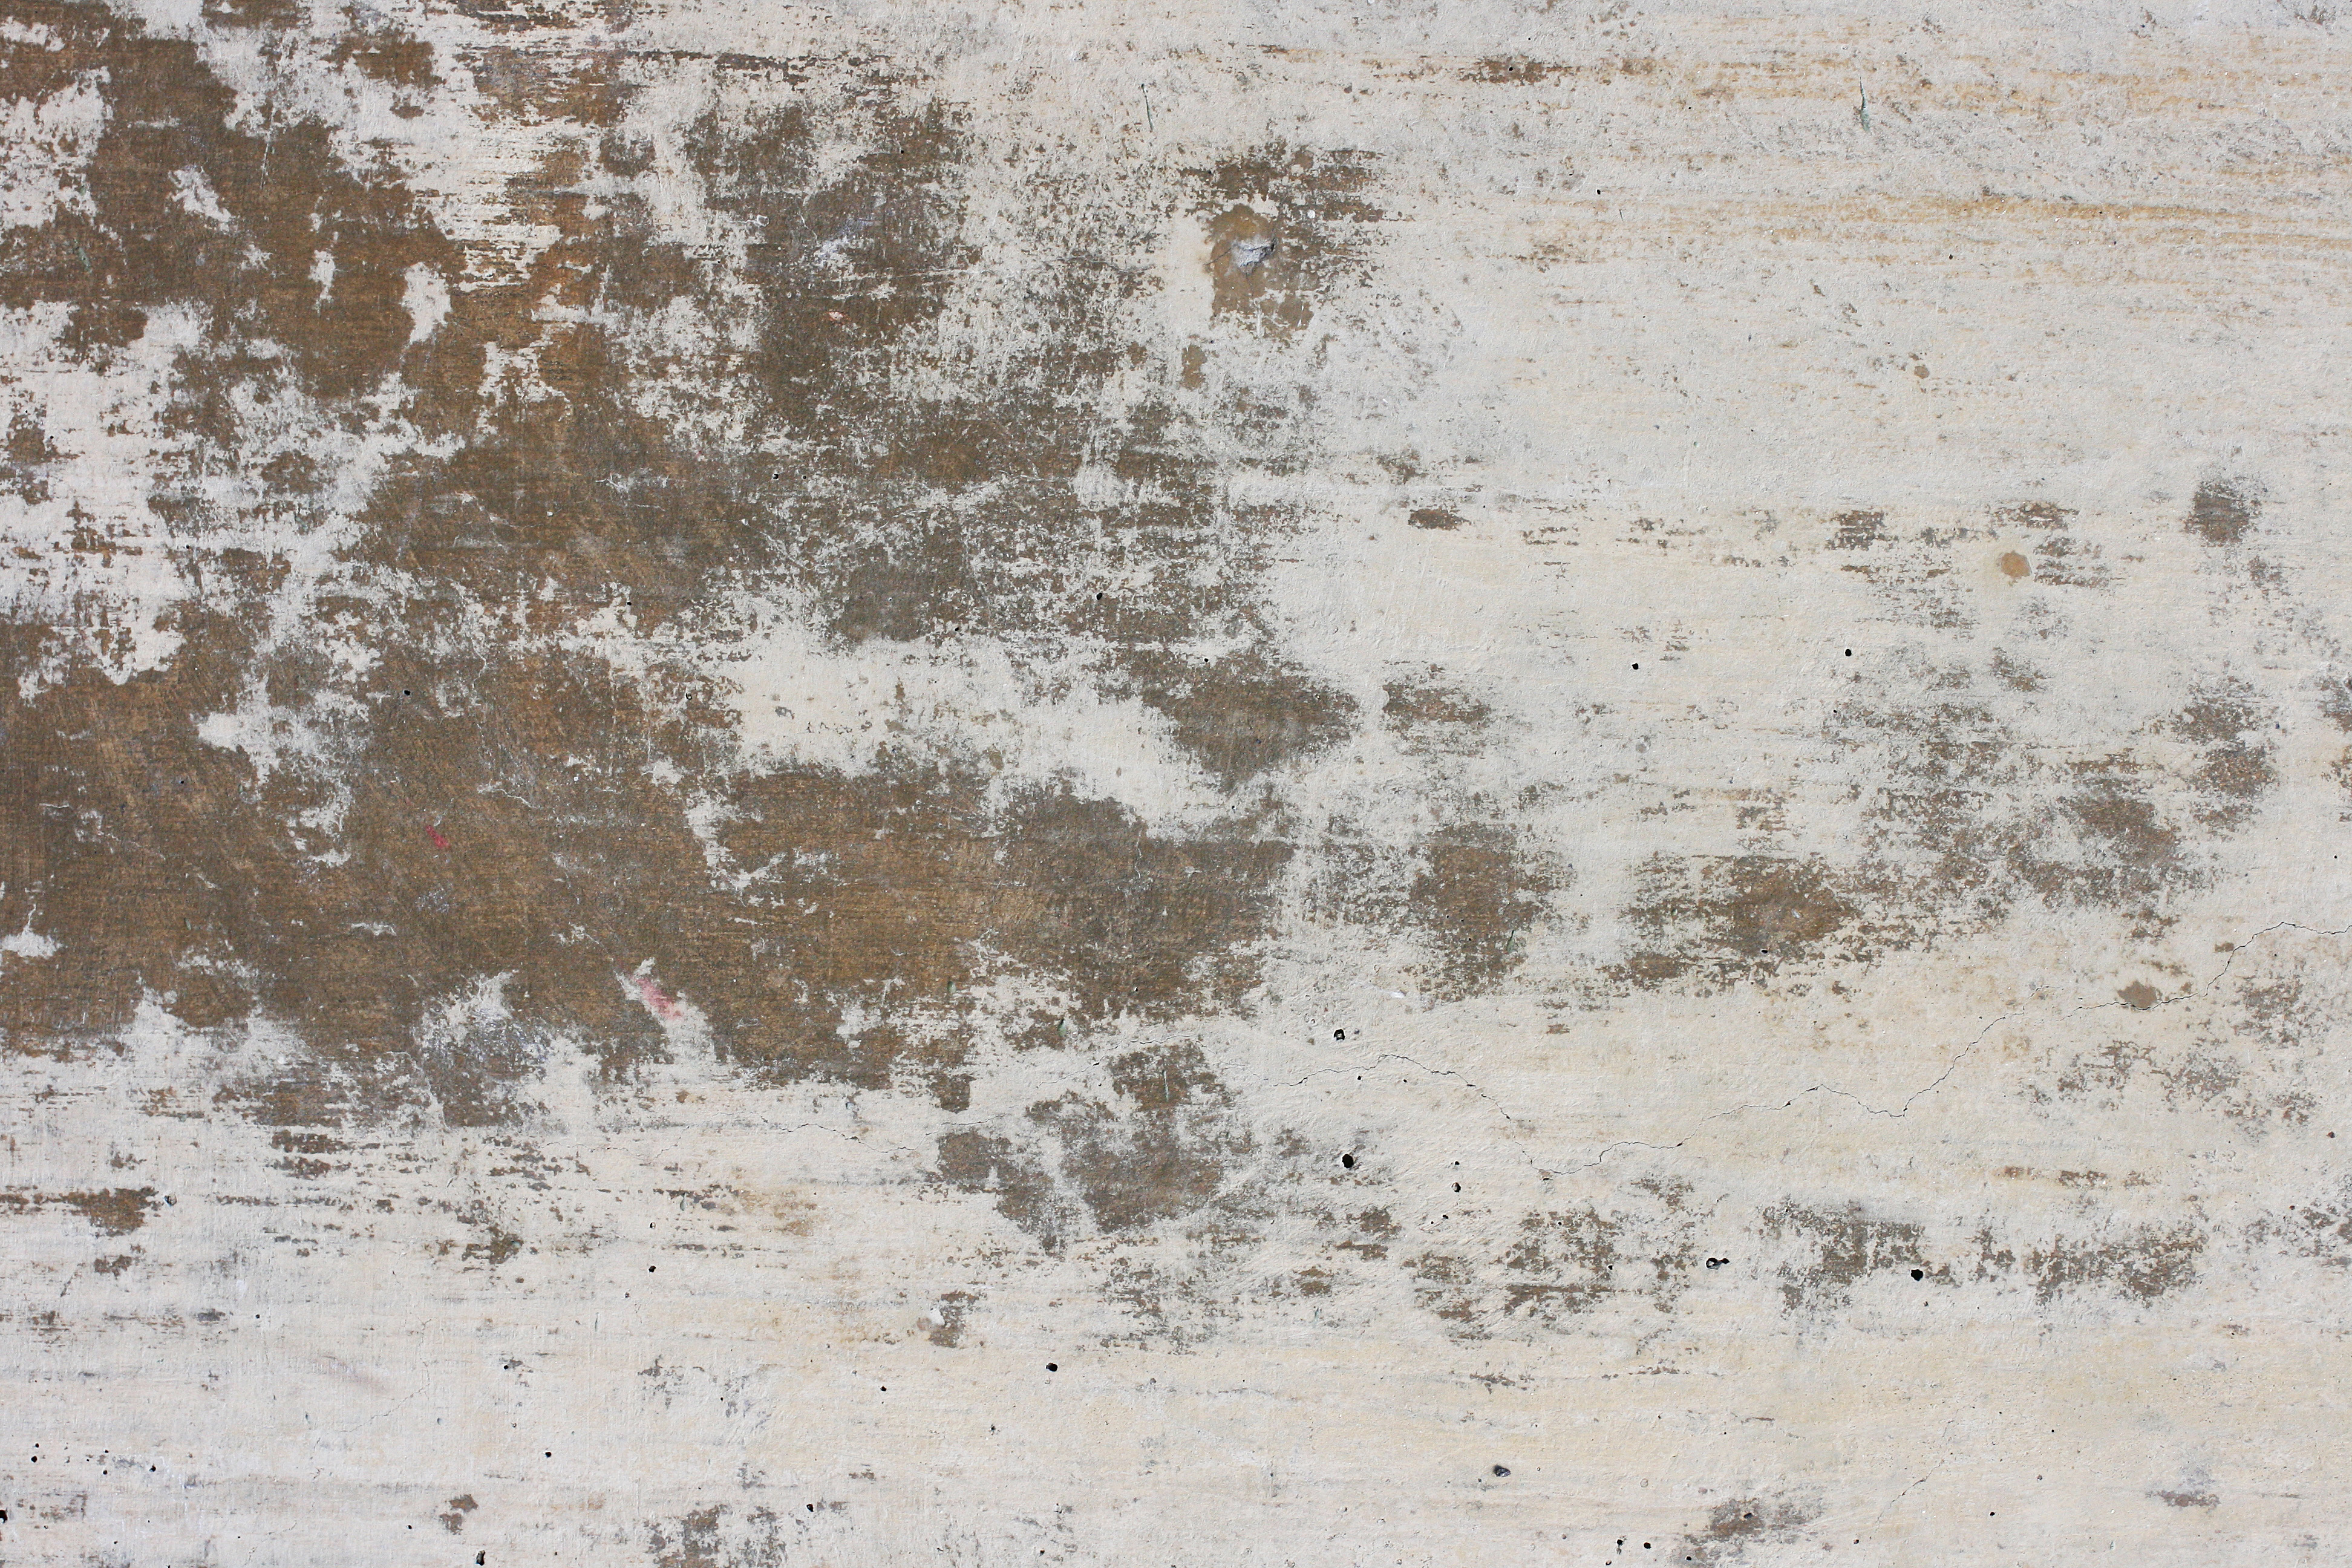 TEXTURE JUNKY » Worn Painted Concrete